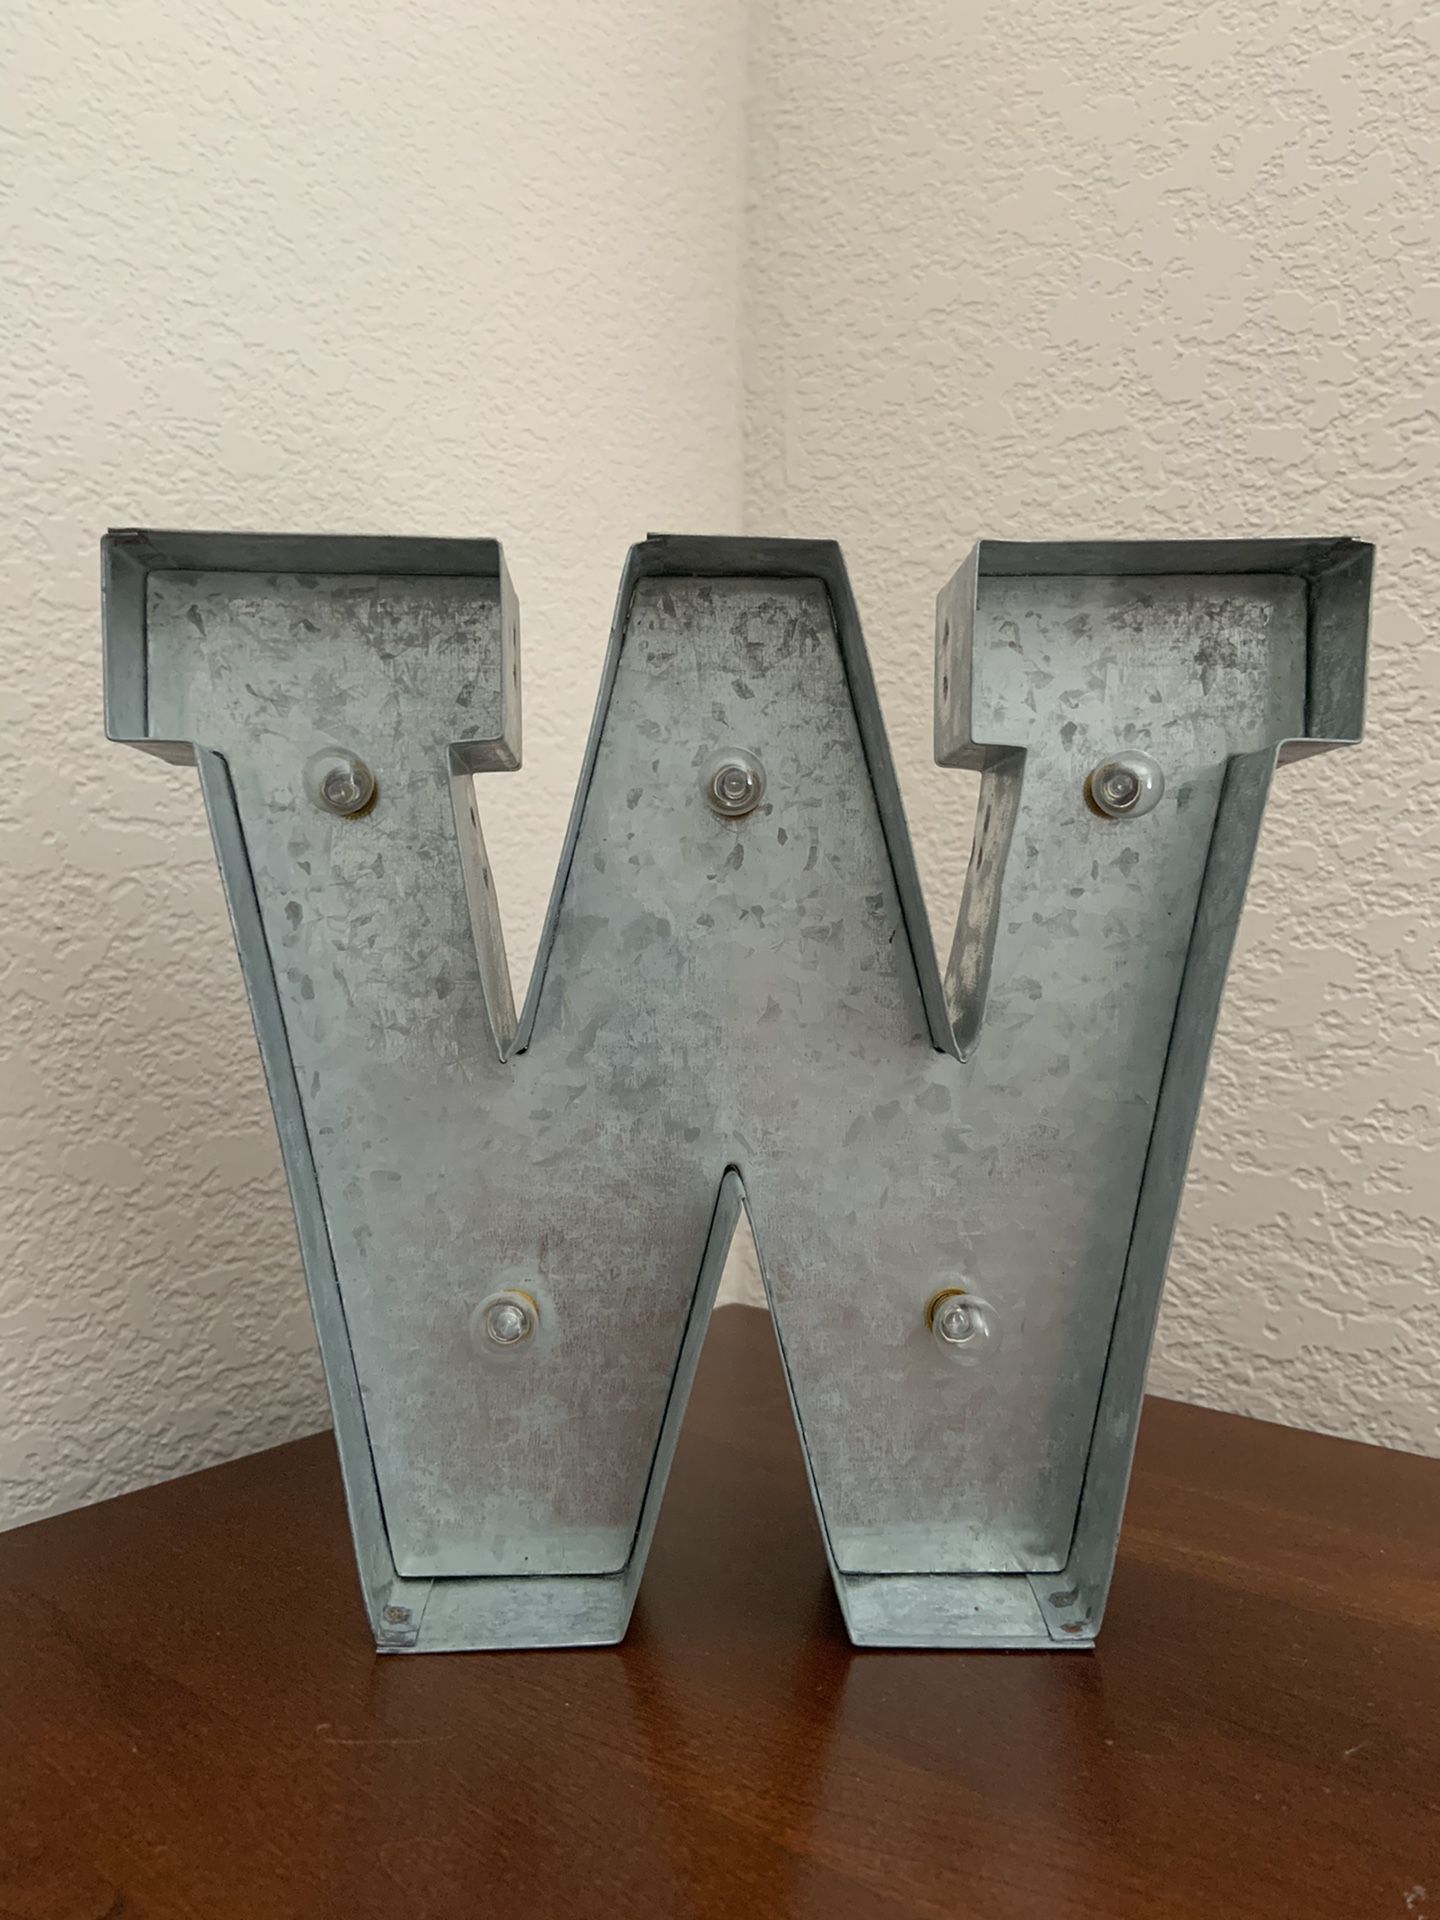 Lighted letter “W” or reverse and is a “M”